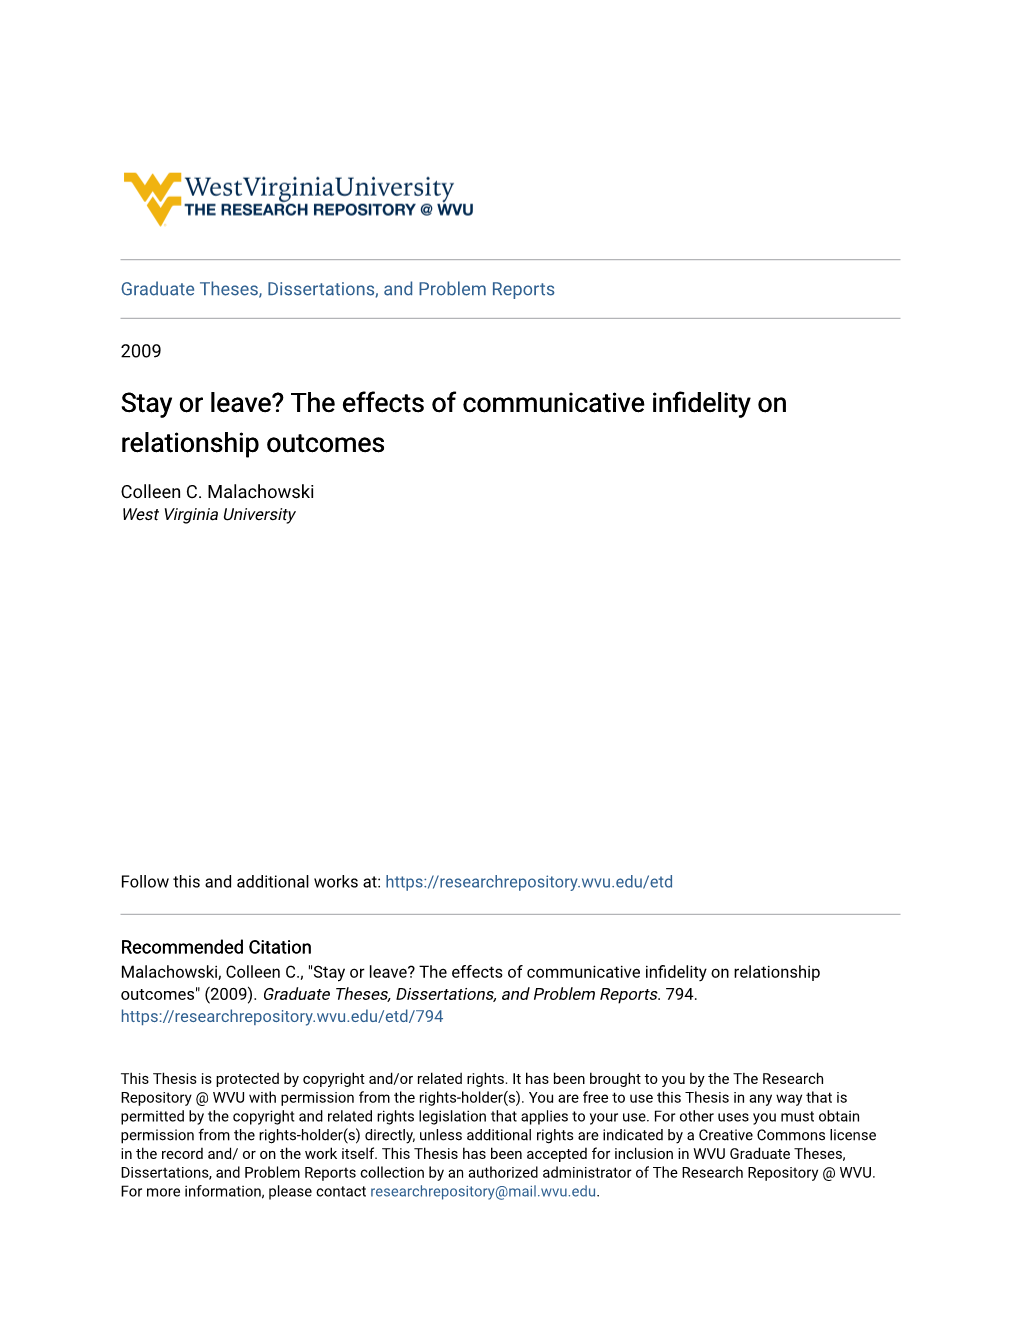 The Effects of Communicative Infidelity on Relationship Outcomes